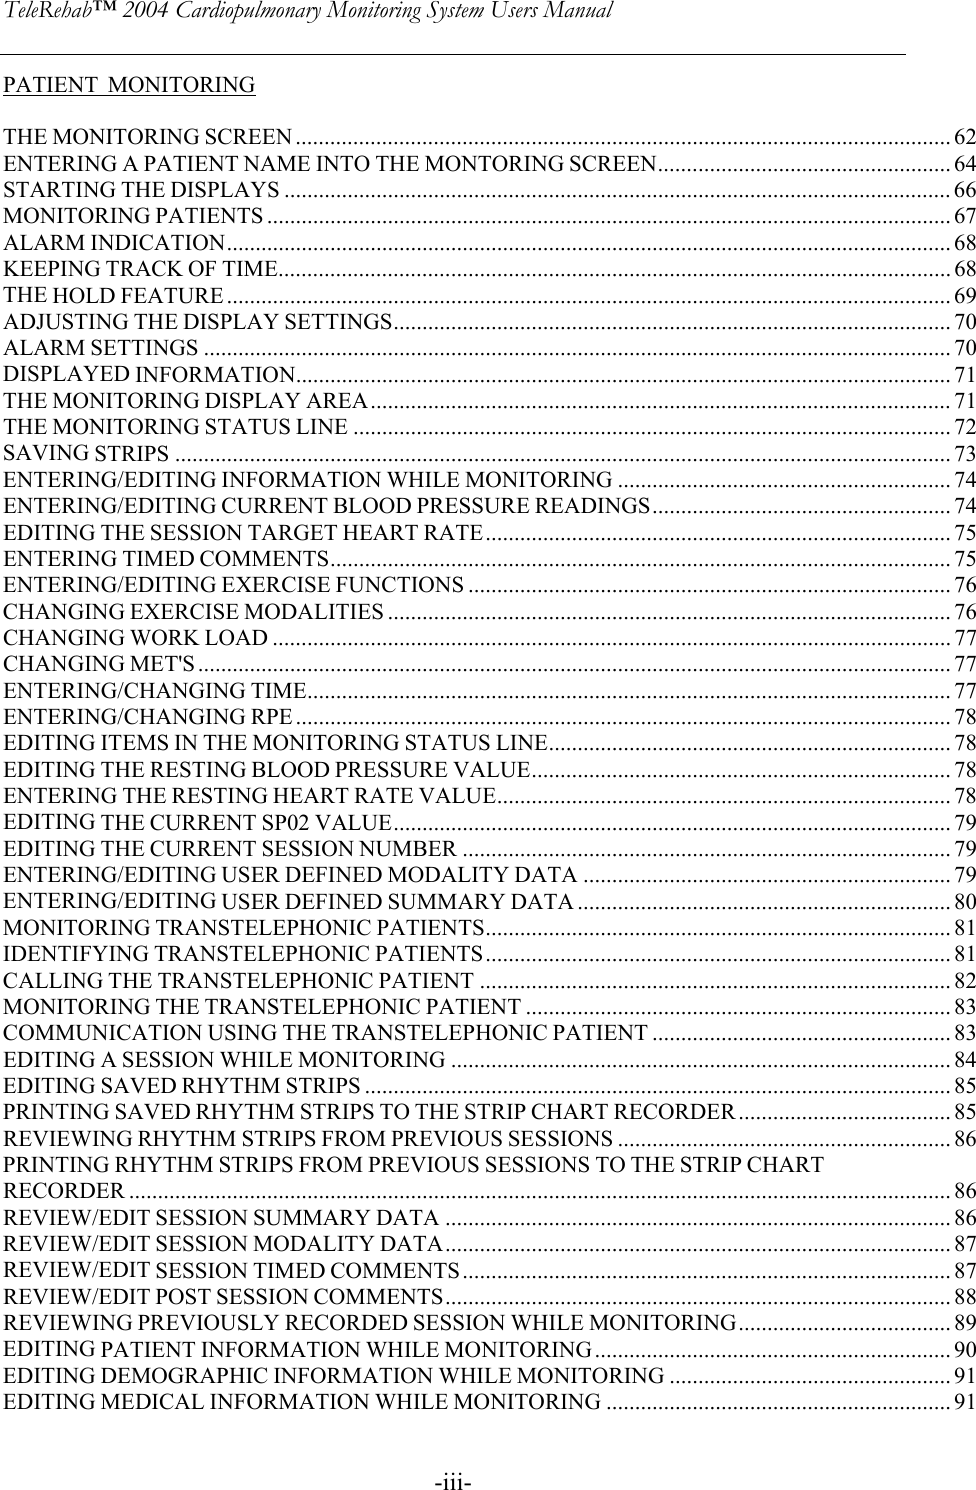 TeleRehab™ 2004 Cardiopulmonary Monitoring System Users Manual    -iii-PATIENT  MONITORING  THE MONITORING SCREEN .................................................................................................................. 62 ENTERING A PATIENT NAME INTO THE MONTORING SCREEN................................................... 64 STARTING THE DISPLAYS .................................................................................................................... 66 MONITORING PATIENTS ....................................................................................................................... 67 ALARM INDICATION.............................................................................................................................. 68 KEEPING TRACK OF TIME..................................................................................................................... 68 THE HOLD FEATURE .............................................................................................................................. 69 ADJUSTING THE DISPLAY SETTINGS................................................................................................. 70 ALARM SETTINGS .................................................................................................................................. 70 DISPLAYED INFORMATION.................................................................................................................. 71 THE MONITORING DISPLAY AREA..................................................................................................... 71  THE MONITORING STATUS LINE ........................................................................................................72 SAVING STRIPS ....................................................................................................................................... 73 ENTERING/EDITING INFORMATION WHILE MONITORING .......................................................... 74 ENTERING/EDITING CURRENT BLOOD PRESSURE READINGS.................................................... 74 EDITING THE SESSION TARGET HEART RATE................................................................................. 75 ENTERING TIMED COMMENTS............................................................................................................75 ENTERING/EDITING EXERCISE FUNCTIONS .................................................................................... 76 CHANGING EXERCISE MODALITIES .................................................................................................. 76 CHANGING WORK LOAD ...................................................................................................................... 77 CHANGING MET&apos;S ................................................................................................................................... 77 ENTERING/CHANGING TIME................................................................................................................ 77 ENTERING/CHANGING RPE .................................................................................................................. 78 EDITING ITEMS IN THE MONITORING STATUS LINE...................................................................... 78 EDITING THE RESTING BLOOD PRESSURE VALUE......................................................................... 78 ENTERING THE RESTING HEART RATE VALUE............................................................................... 78 EDITING THE CURRENT SP02 VALUE................................................................................................. 79 EDITING THE CURRENT SESSION NUMBER ..................................................................................... 79 ENTERING/EDITING USER DEFINED MODALITY DATA ................................................................ 79 ENTERING/EDITING USER DEFINED SUMMARY DATA ................................................................. 80 MONITORING TRANSTELEPHONIC PATIENTS................................................................................. 81 IDENTIFYING TRANSTELEPHONIC PATIENTS................................................................................. 81 CALLING THE TRANSTELEPHONIC PATIENT .................................................................................. 82 MONITORING THE TRANSTELEPHONIC PATIENT .......................................................................... 83 COMMUNICATION USING THE TRANSTELEPHONIC PATIENT .................................................... 83 EDITING A SESSION WHILE MONITORING ....................................................................................... 84 EDITING SAVED RHYTHM STRIPS ...................................................................................................... 85 PRINTING SAVED RHYTHM STRIPS TO THE STRIP CHART RECORDER..................................... 85 REVIEWING RHYTHM STRIPS FROM PREVIOUS SESSIONS .......................................................... 86 PRINTING RHYTHM STRIPS FROM PREVIOUS SESSIONS TO THE STRIP CHART RECORDER ............................................................................................................................................... 86 REVIEW/EDIT SESSION SUMMARY DATA ........................................................................................86 REVIEW/EDIT SESSION MODALITY DATA........................................................................................ 87 REVIEW/EDIT SESSION TIMED COMMENTS..................................................................................... 87 REVIEW/EDIT POST SESSION COMMENTS........................................................................................ 88 REVIEWING PREVIOUSLY RECORDED SESSION WHILE MONITORING..................................... 89 EDITING PATIENT INFORMATION WHILE MONITORING.............................................................. 90 EDITING DEMOGRAPHIC INFORMATION WHILE MONITORING ................................................. 91 EDITING MEDICAL INFORMATION WHILE MONITORING ............................................................ 91 